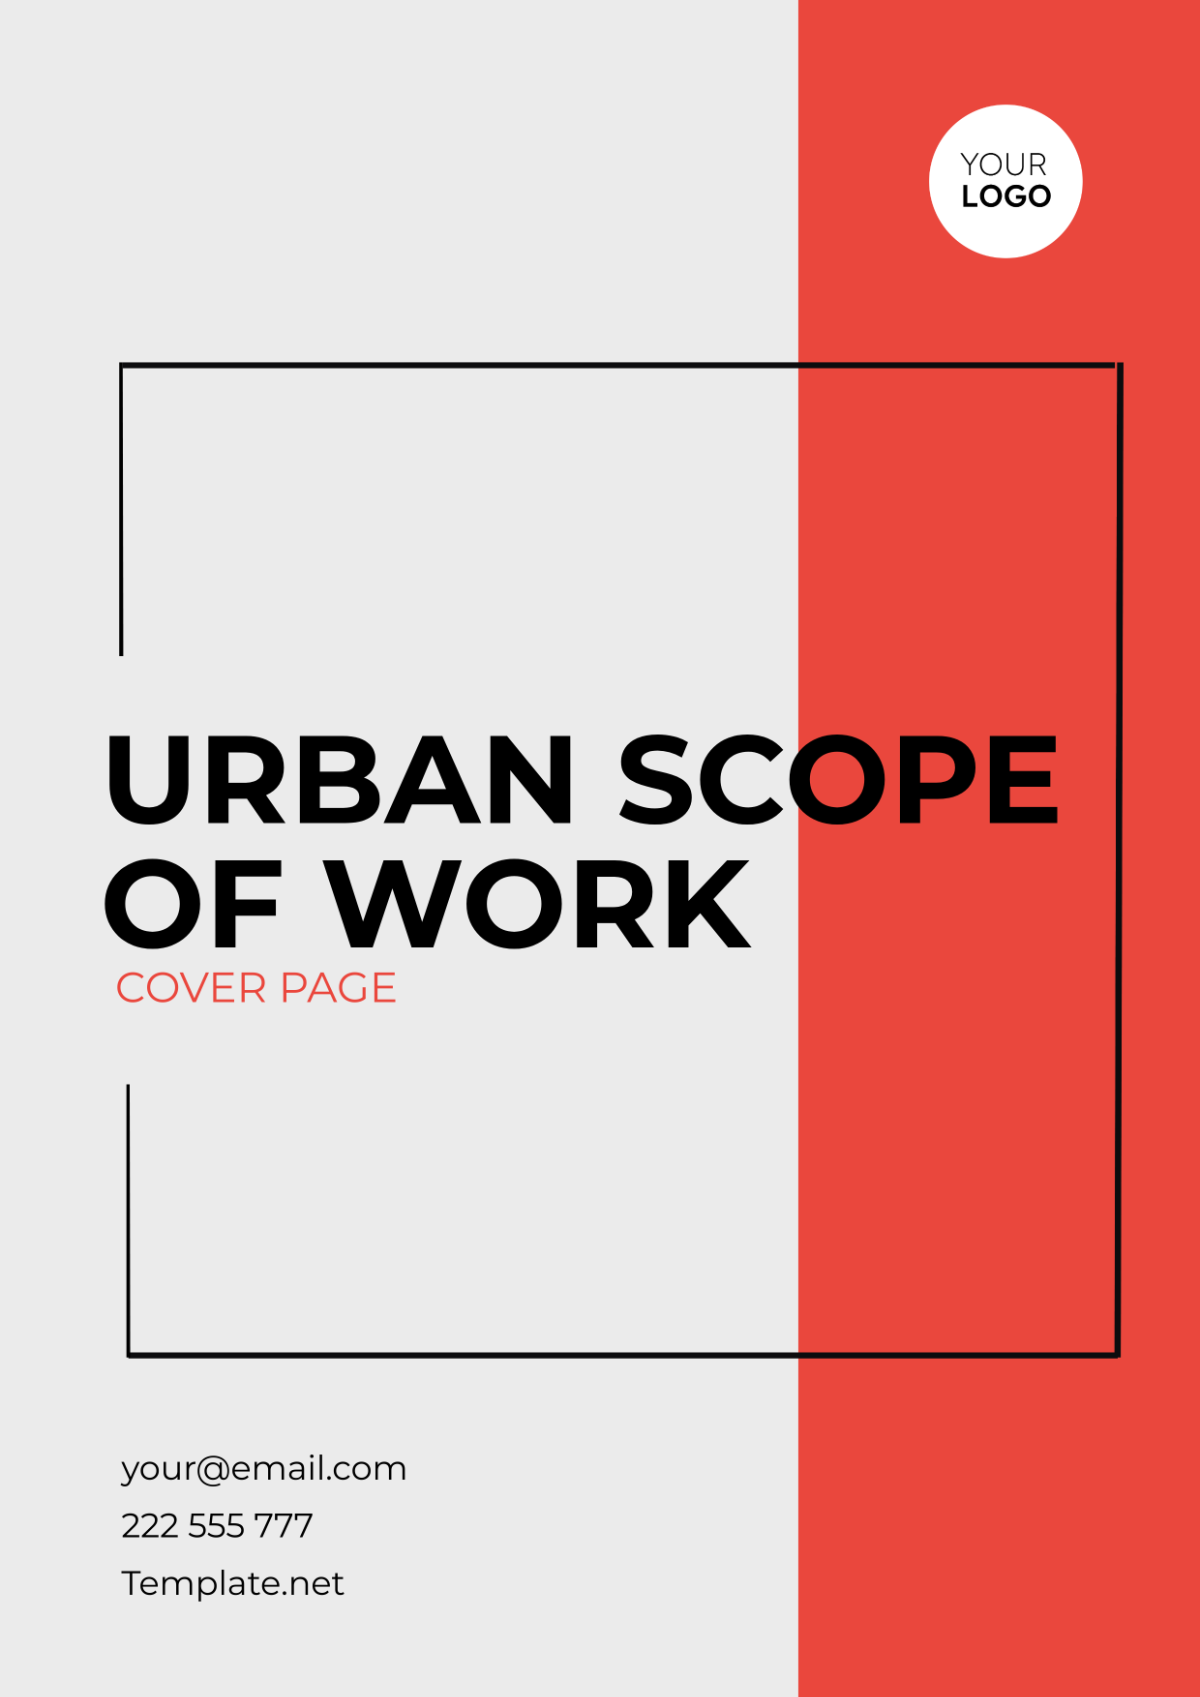 Urban Scope of Work Cover Page